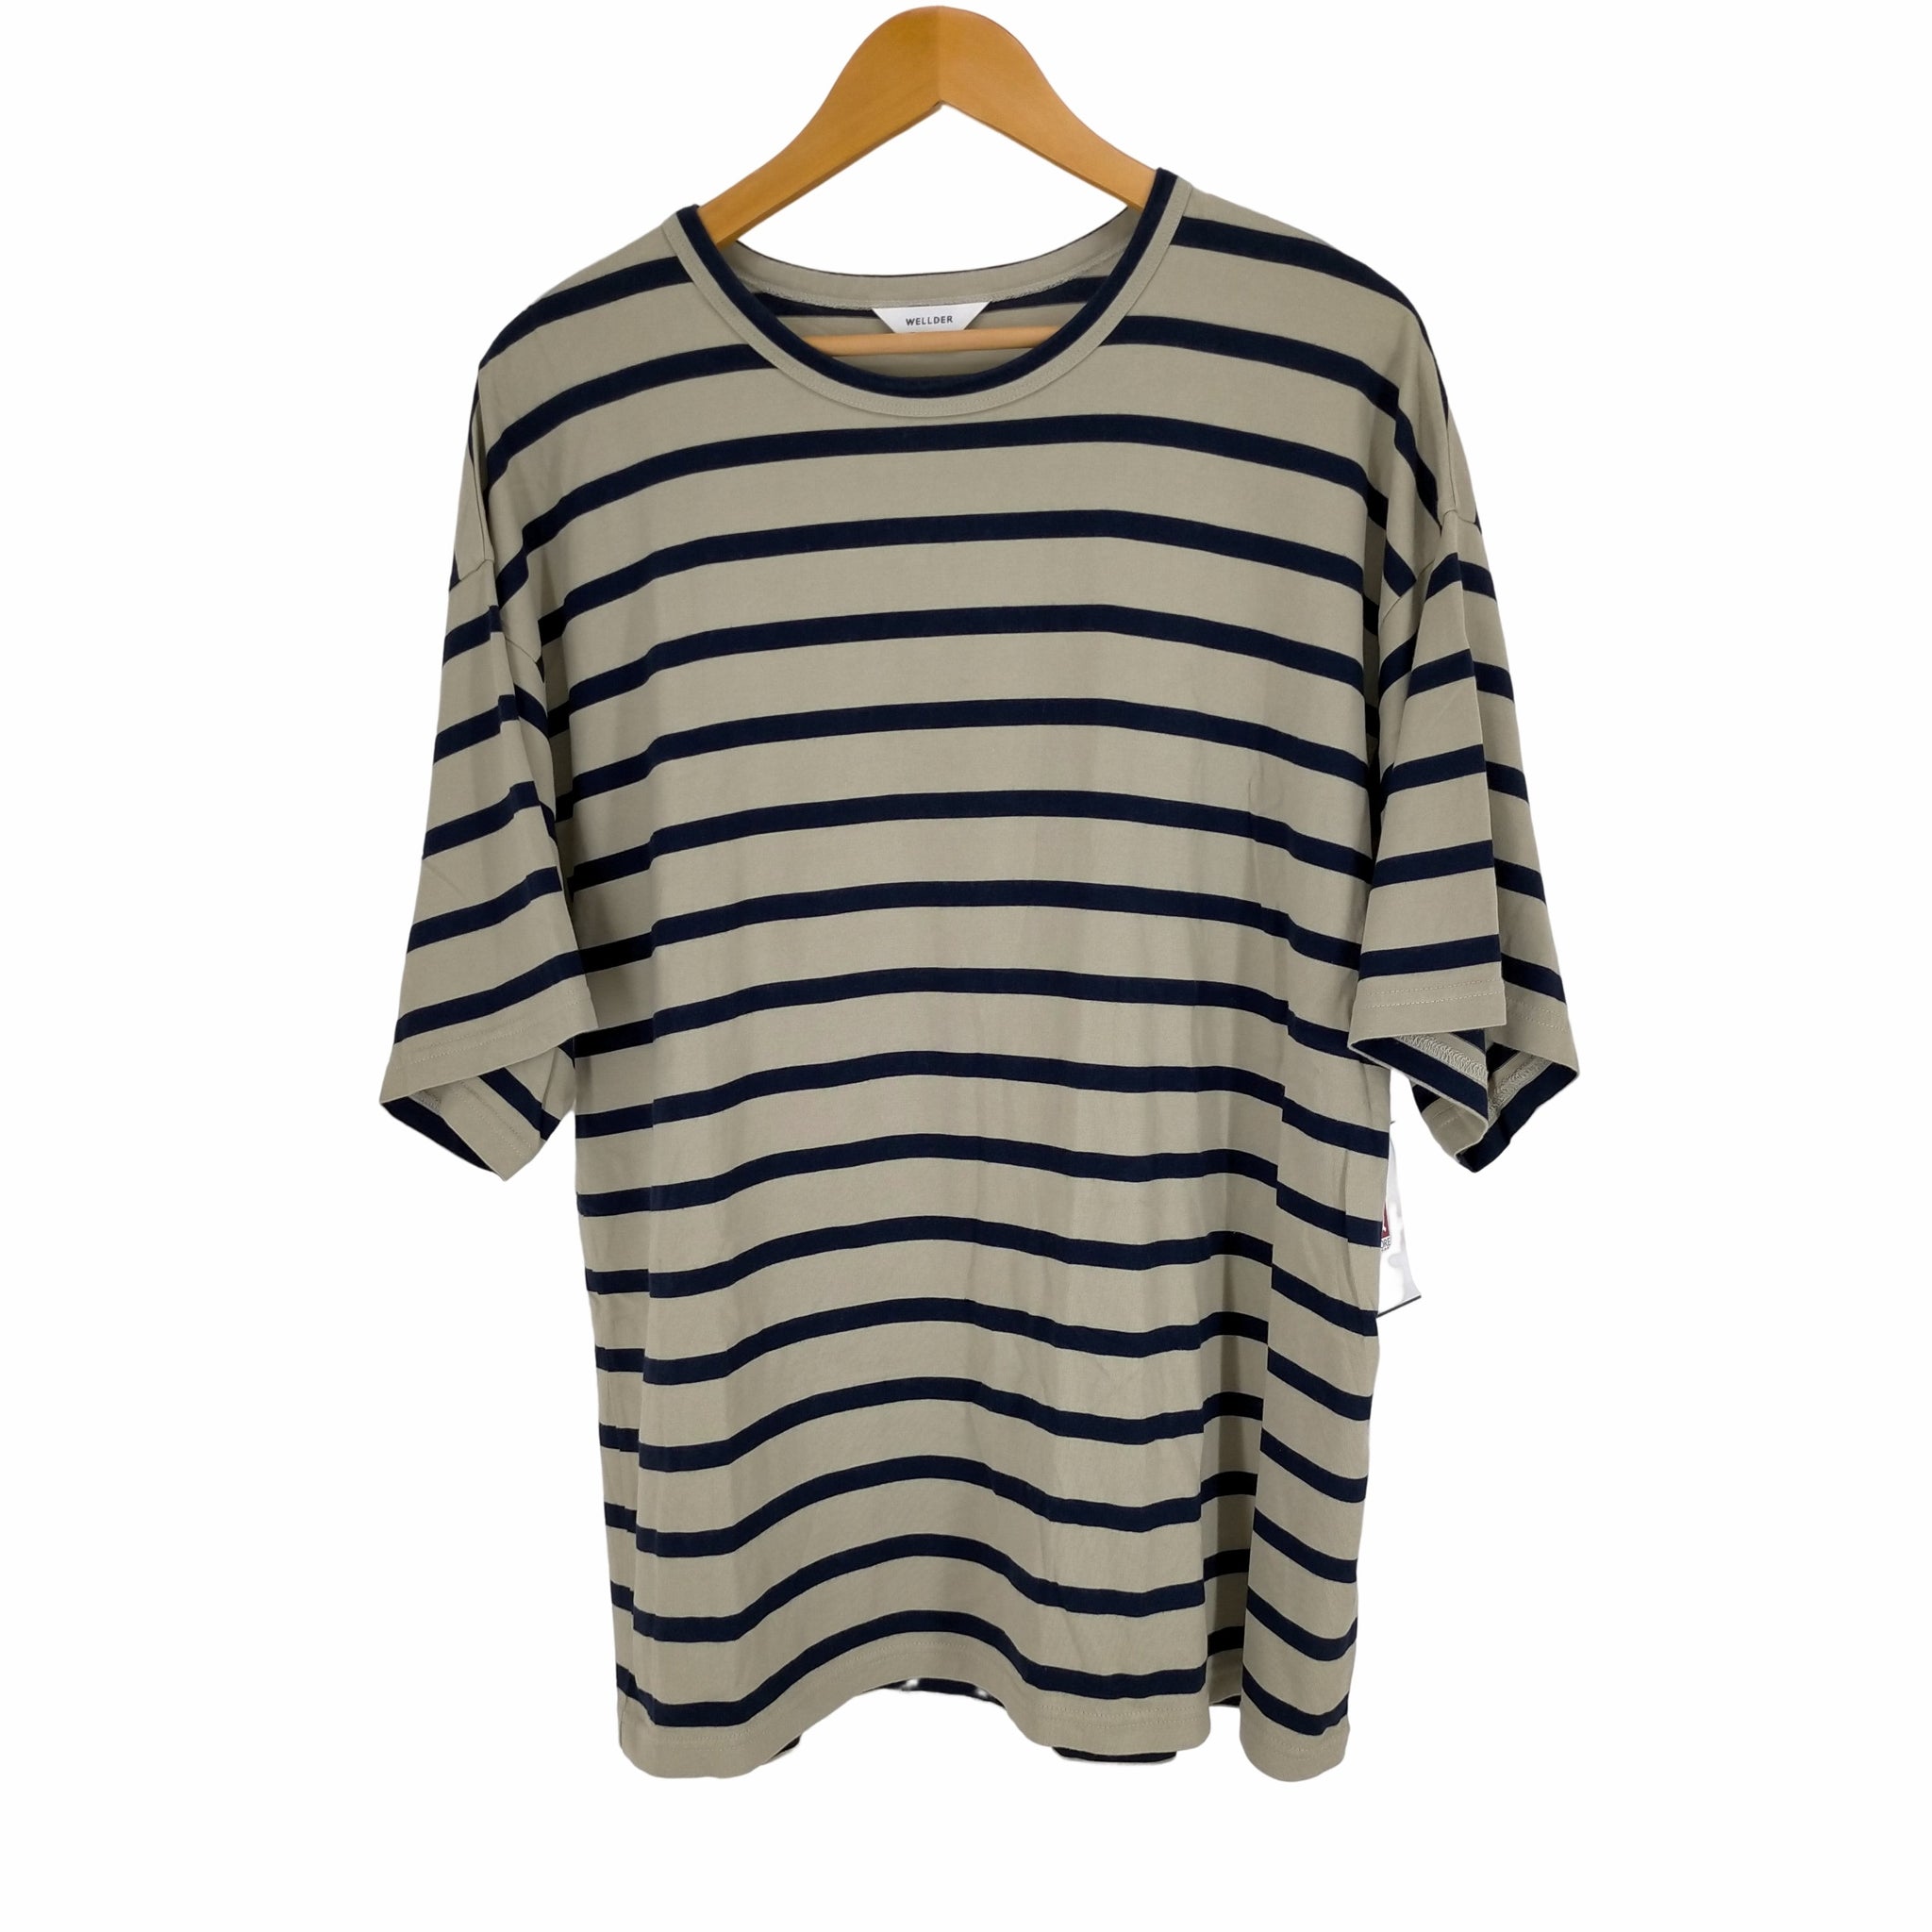 WELLDER(ウェルダー)20AW Wide Fit T-shirt